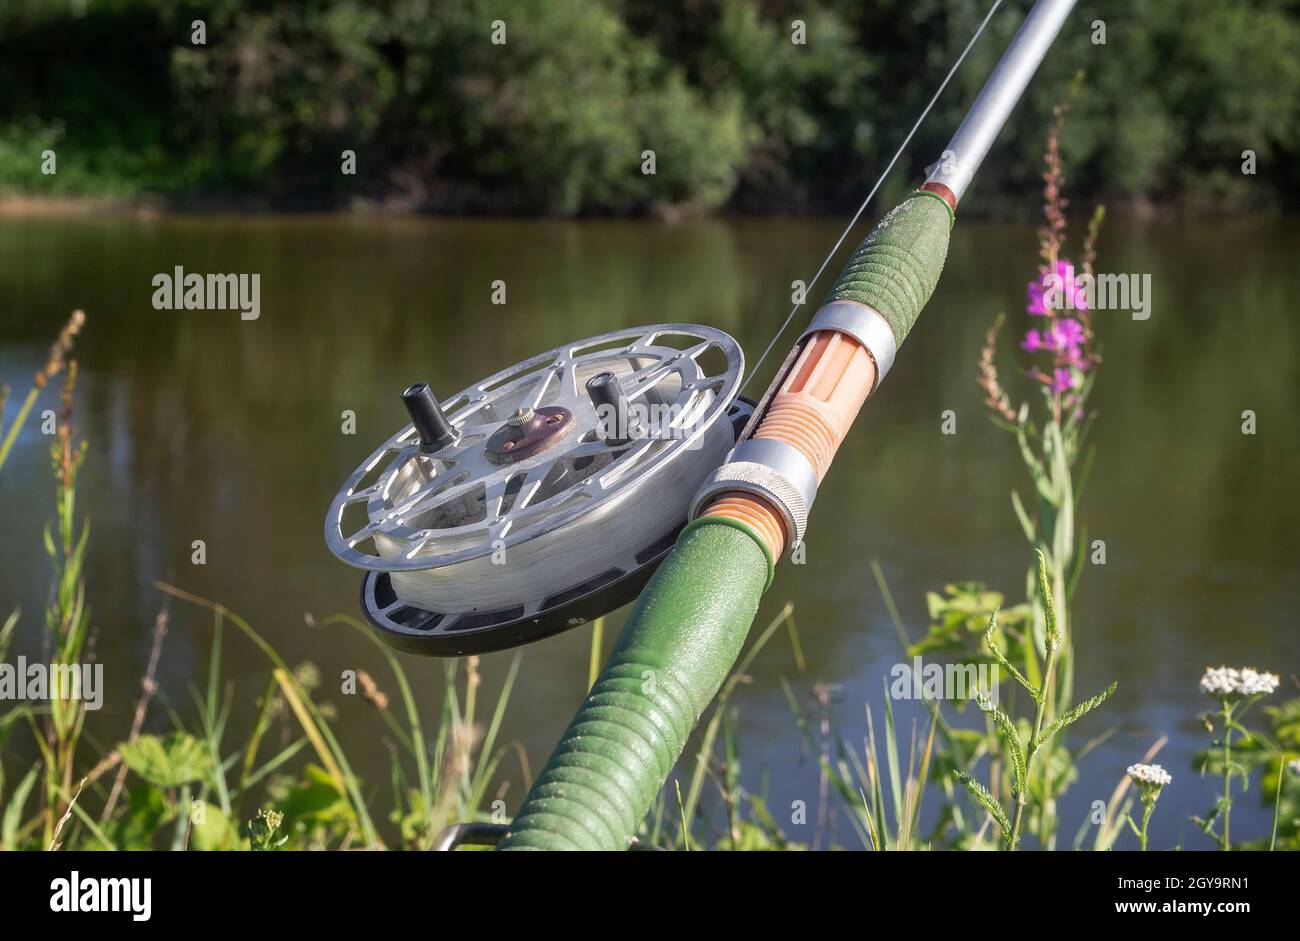 On the banks of the beautiful river over the water set fishing equipment to  fish comfortably with rod and reel Stock Photo - Alamy